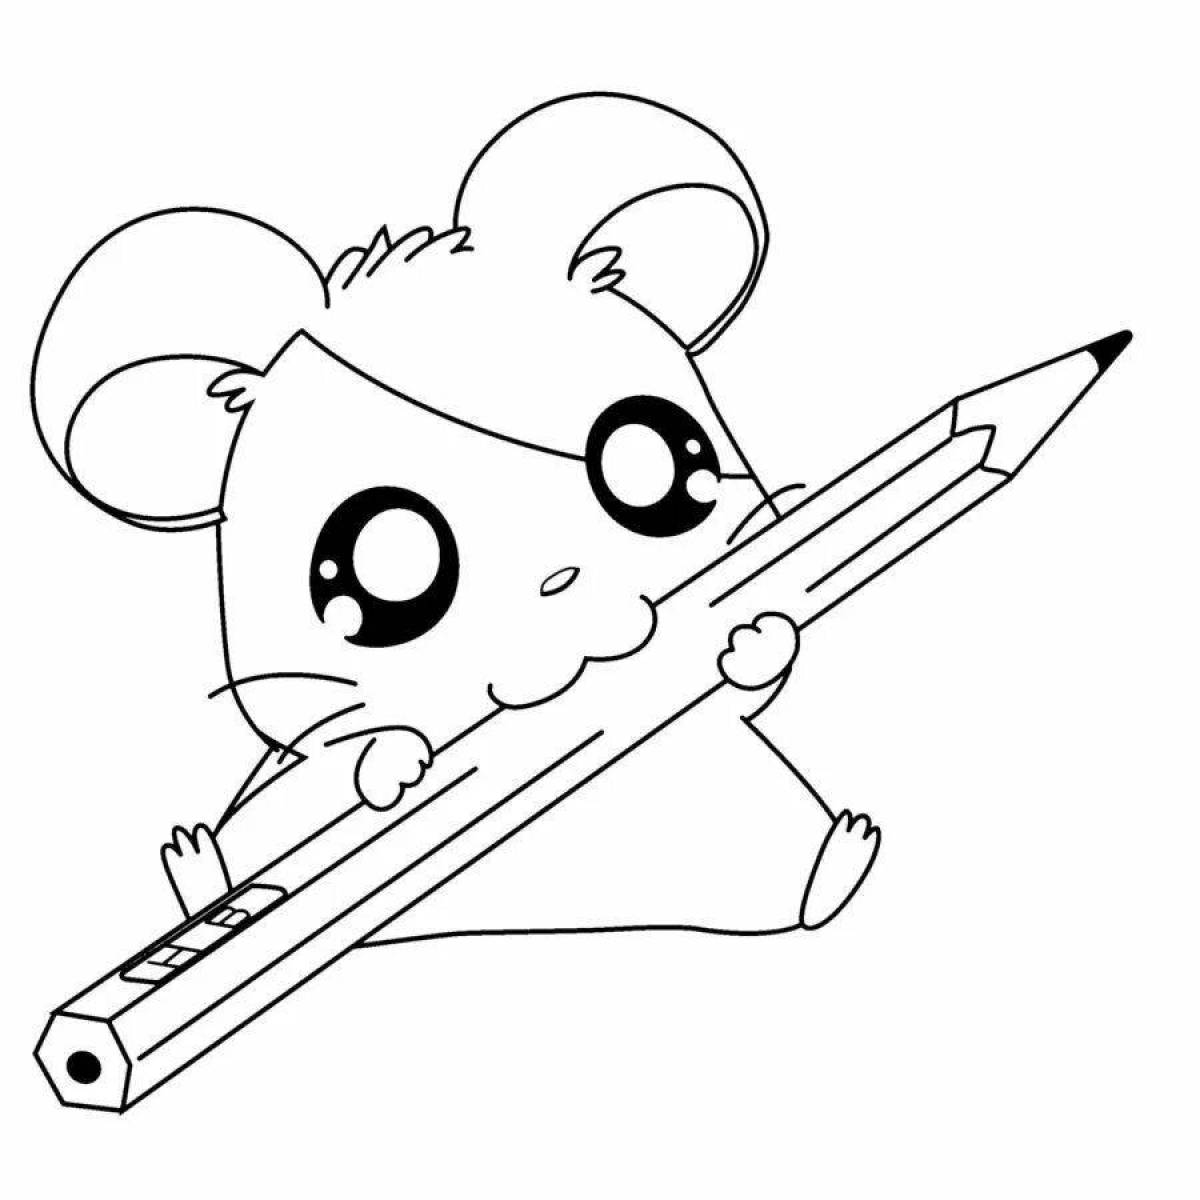 Excellent coloring pages animals cute beautiful